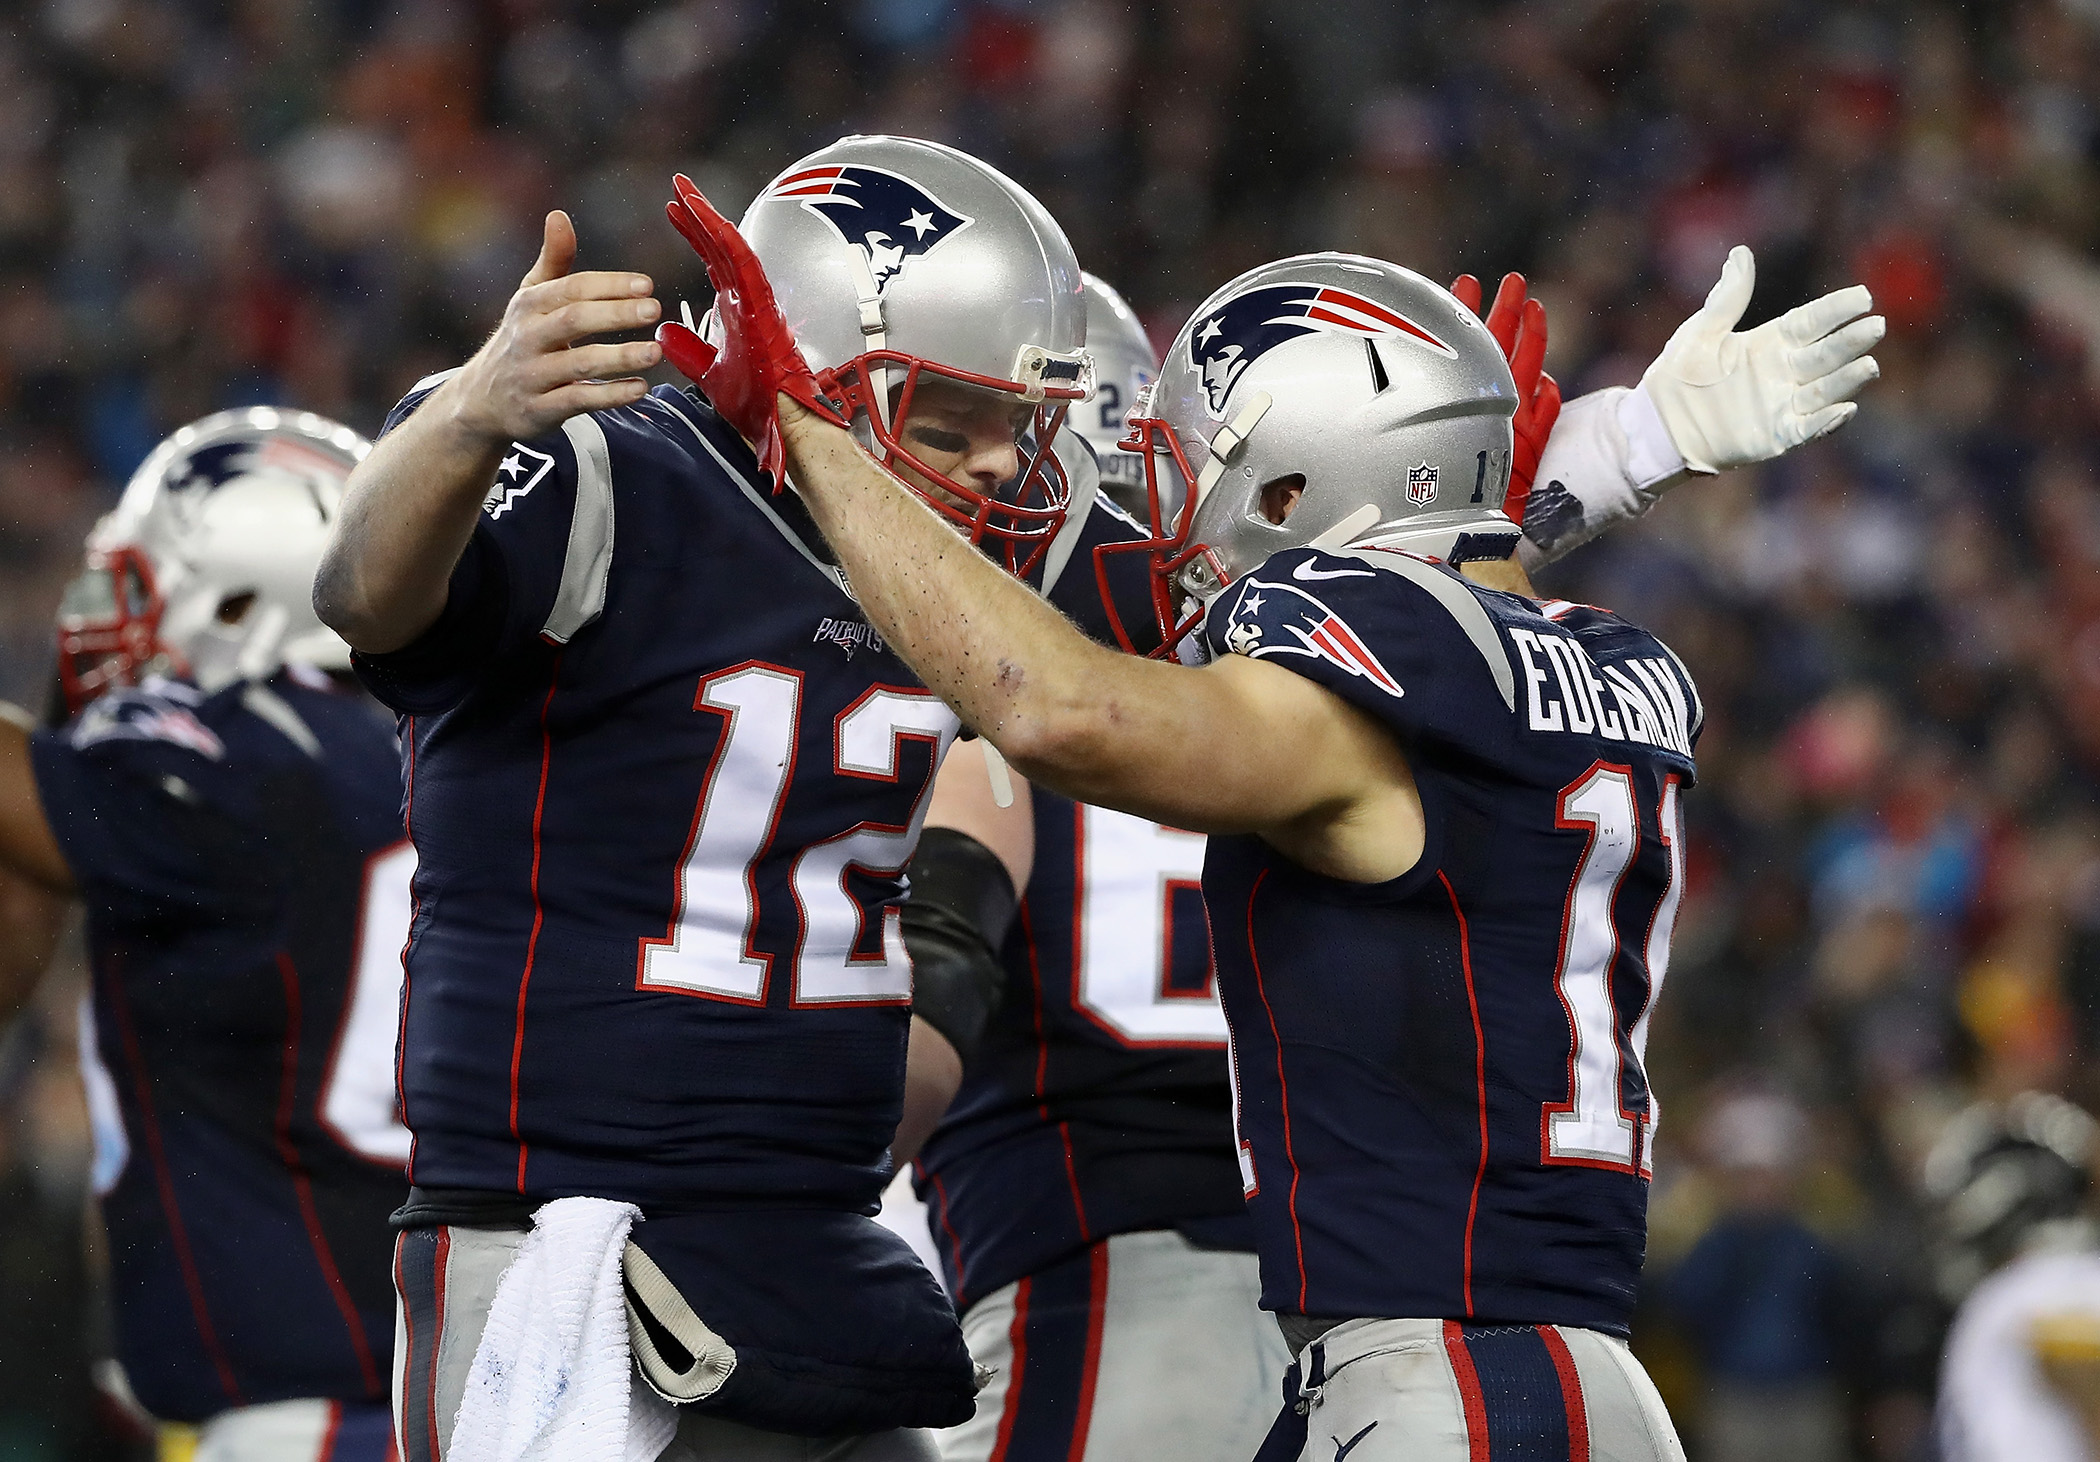 Julian Edelman #11 of the New England Patriots celebrates with Tom Brady #12 after scoring a touchdown during the third quarter against the Pittsburgh Steelers in the AFC Championship Game at Gillette Stadium on January 22, 2017 in Foxboro, Massachusetts. (Getty Images)